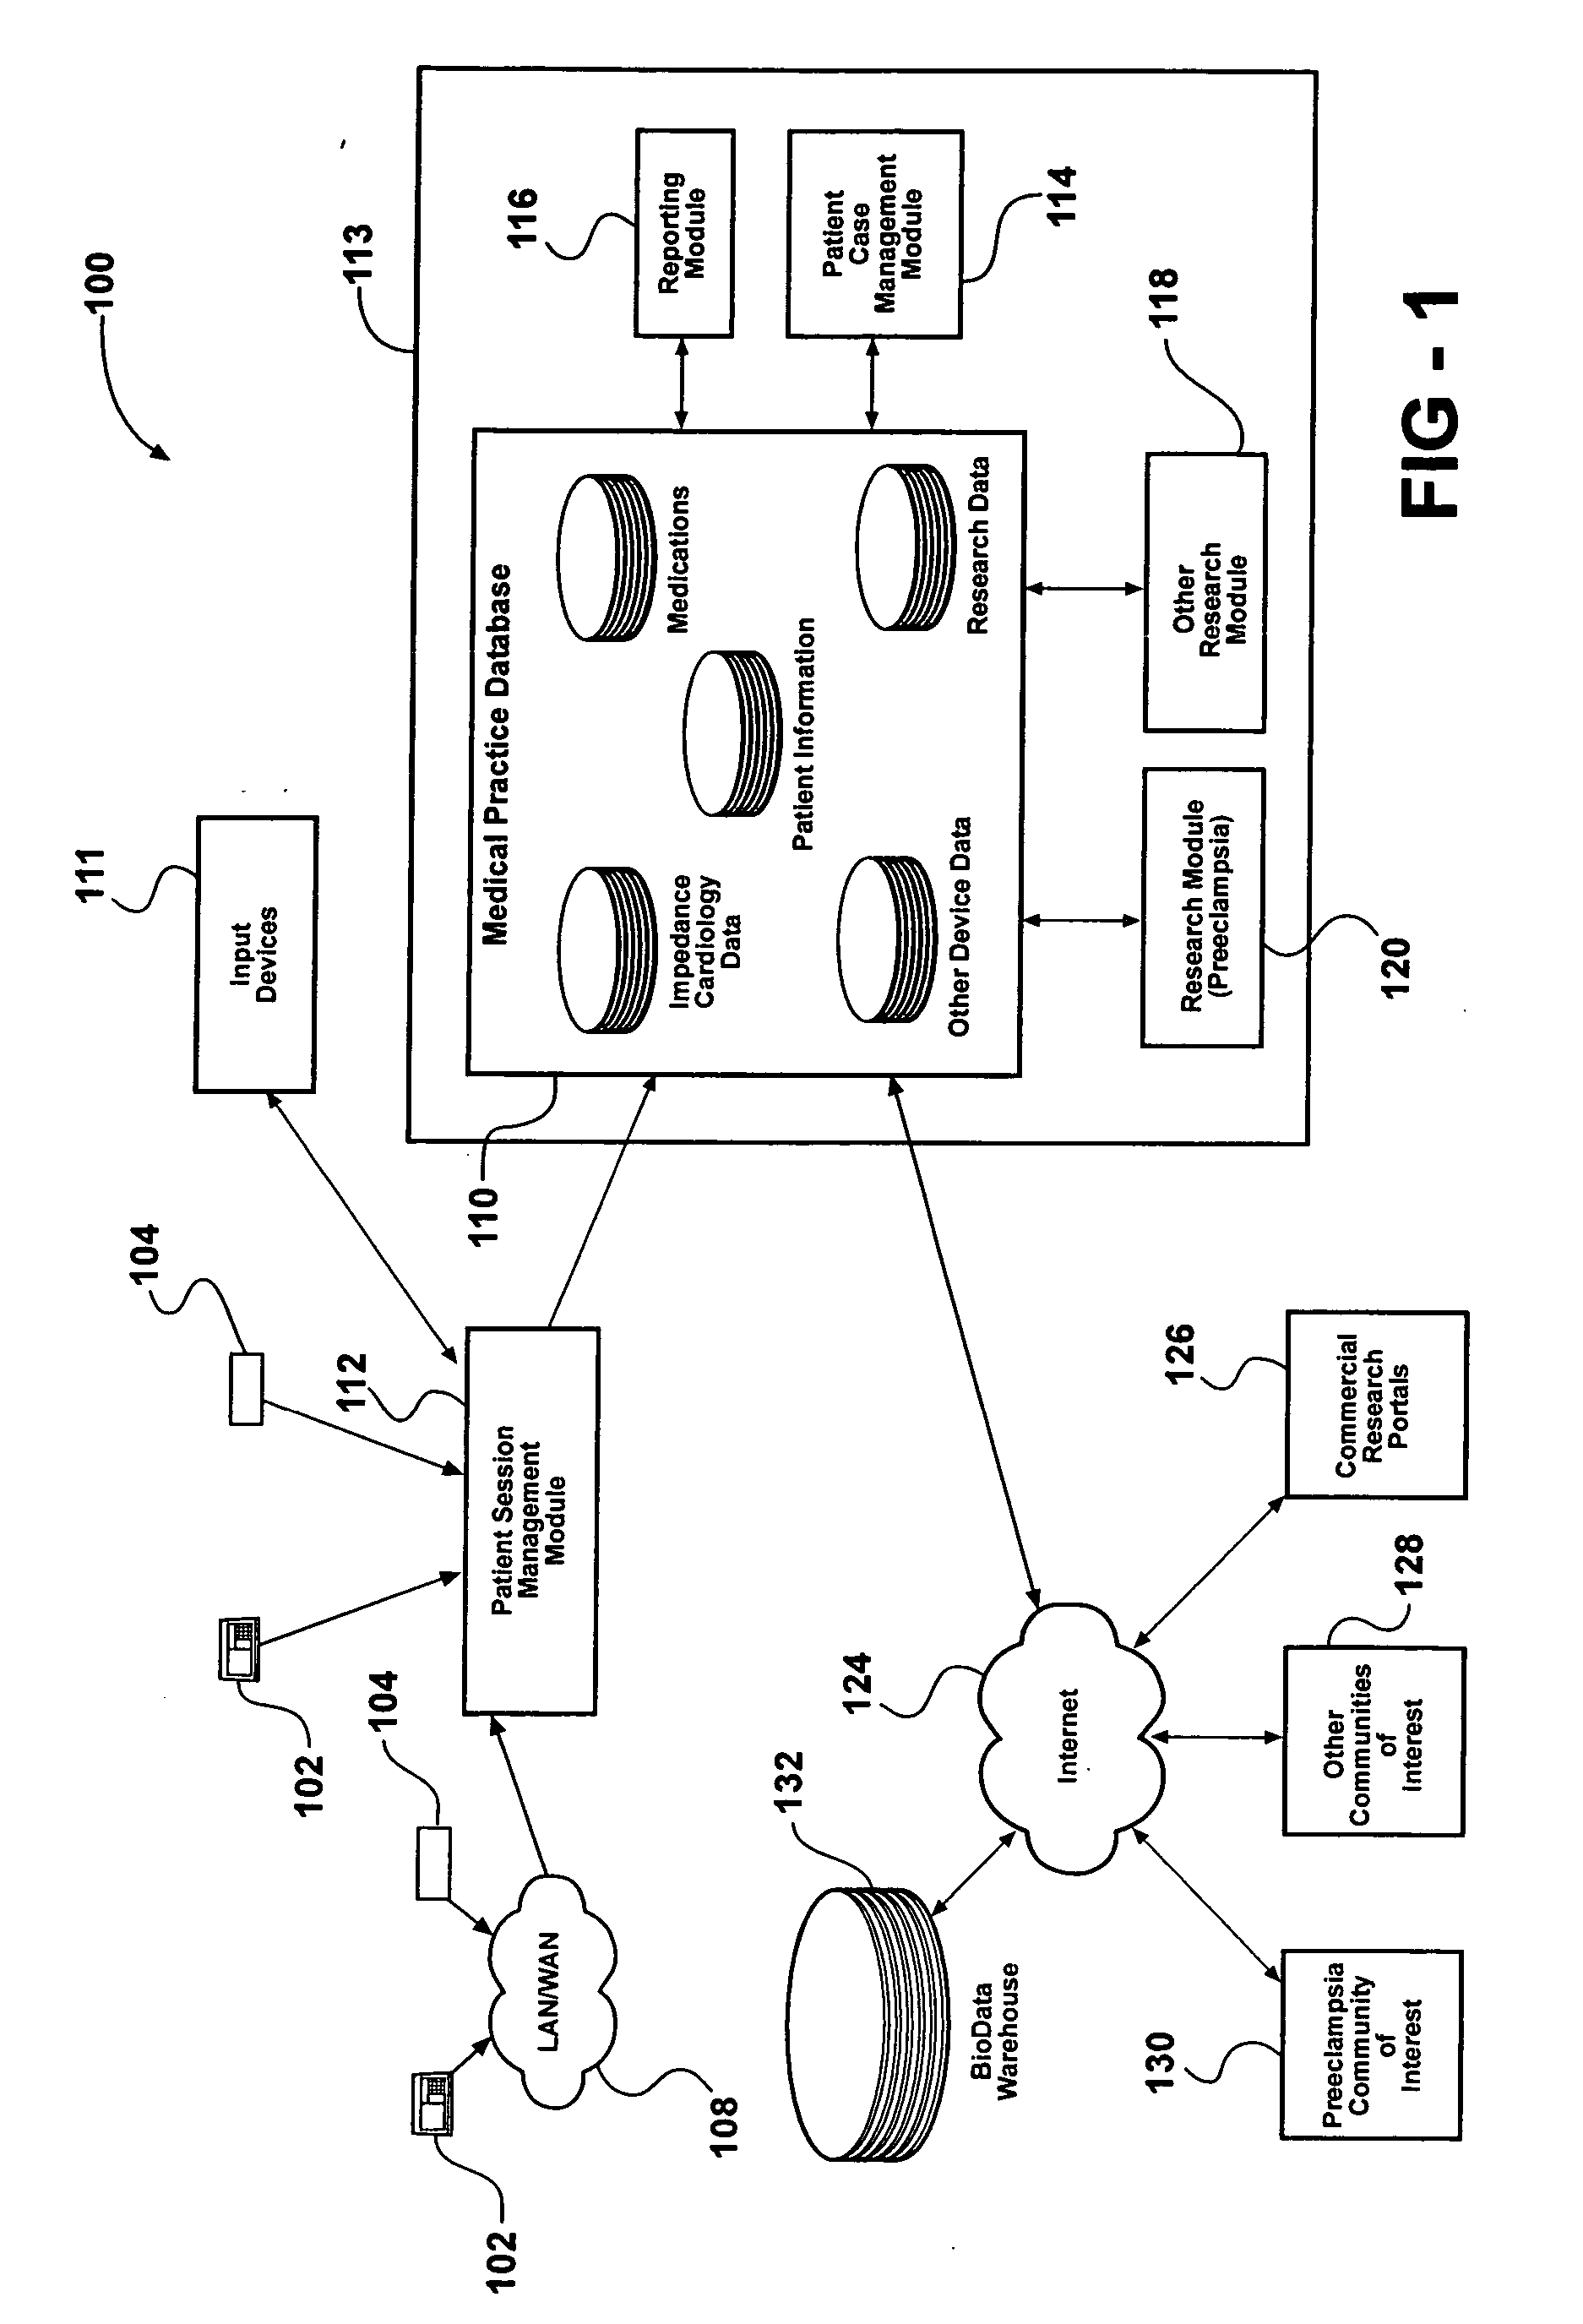 System and method for evaluating, monitoring, diagnosing, and treating hypertension and other medical disorders